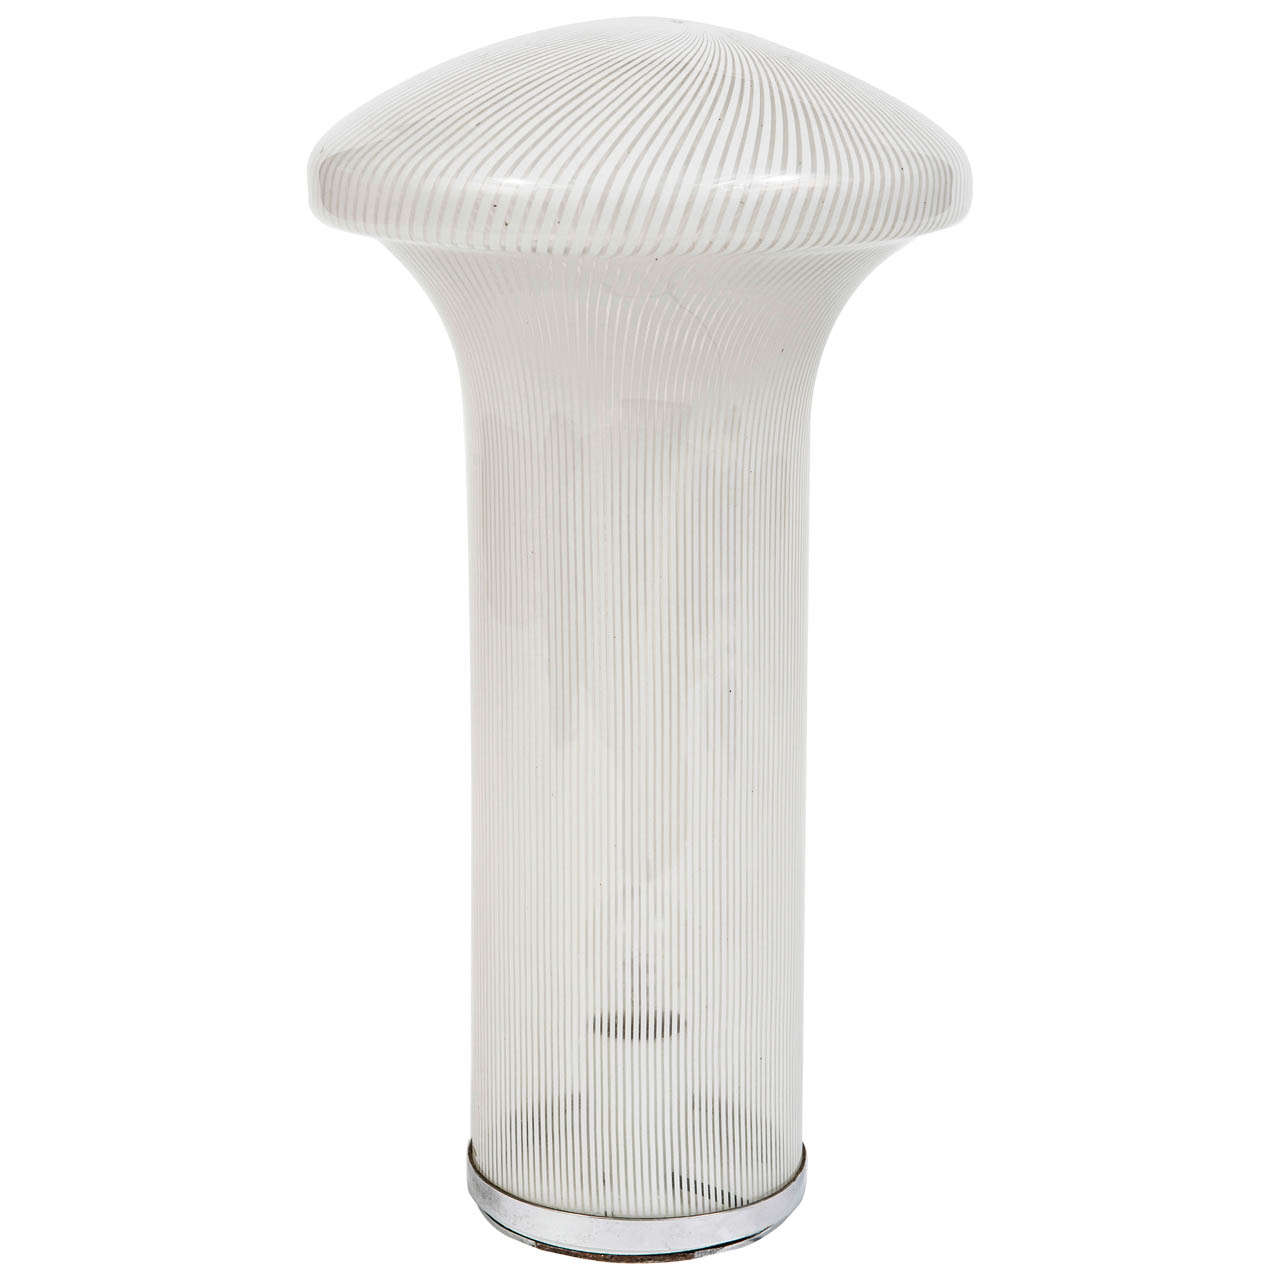 Murano glass lamp with opaque white stripes, Italy circa 1960